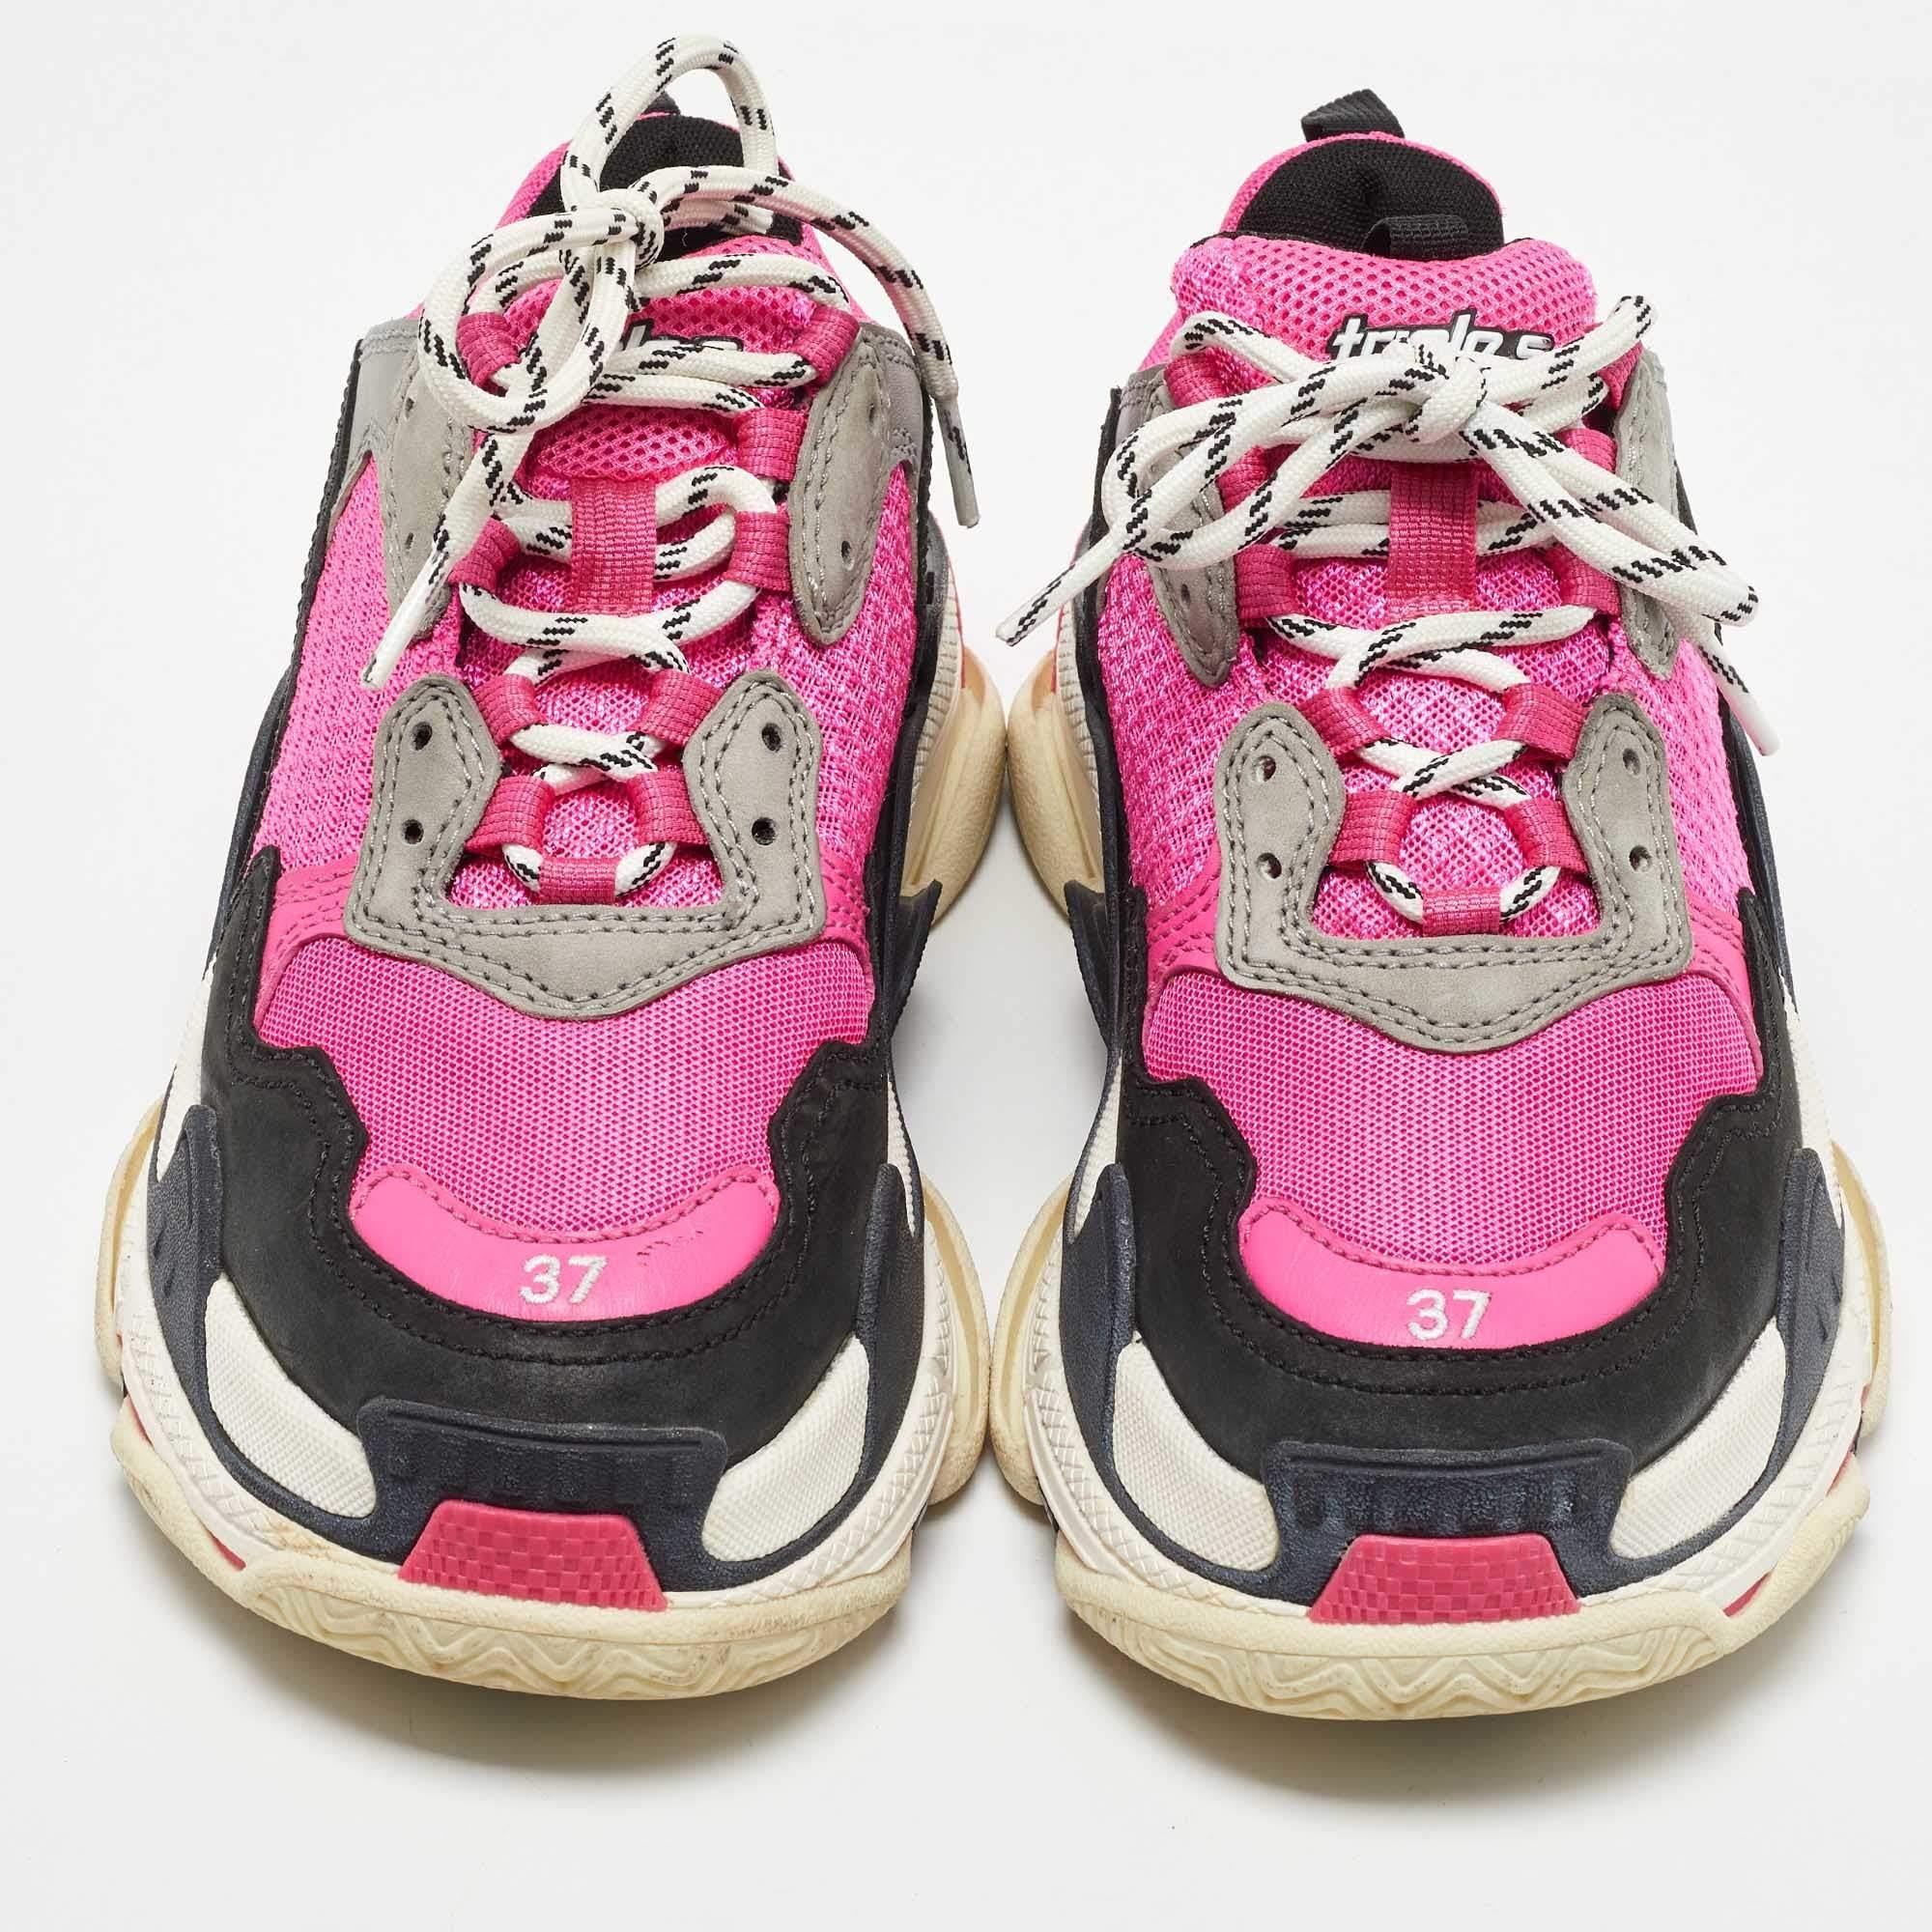 Women's Balenciaga Pink/Black Mesh and Leather Triple S Sneakers Size 37 For Sale